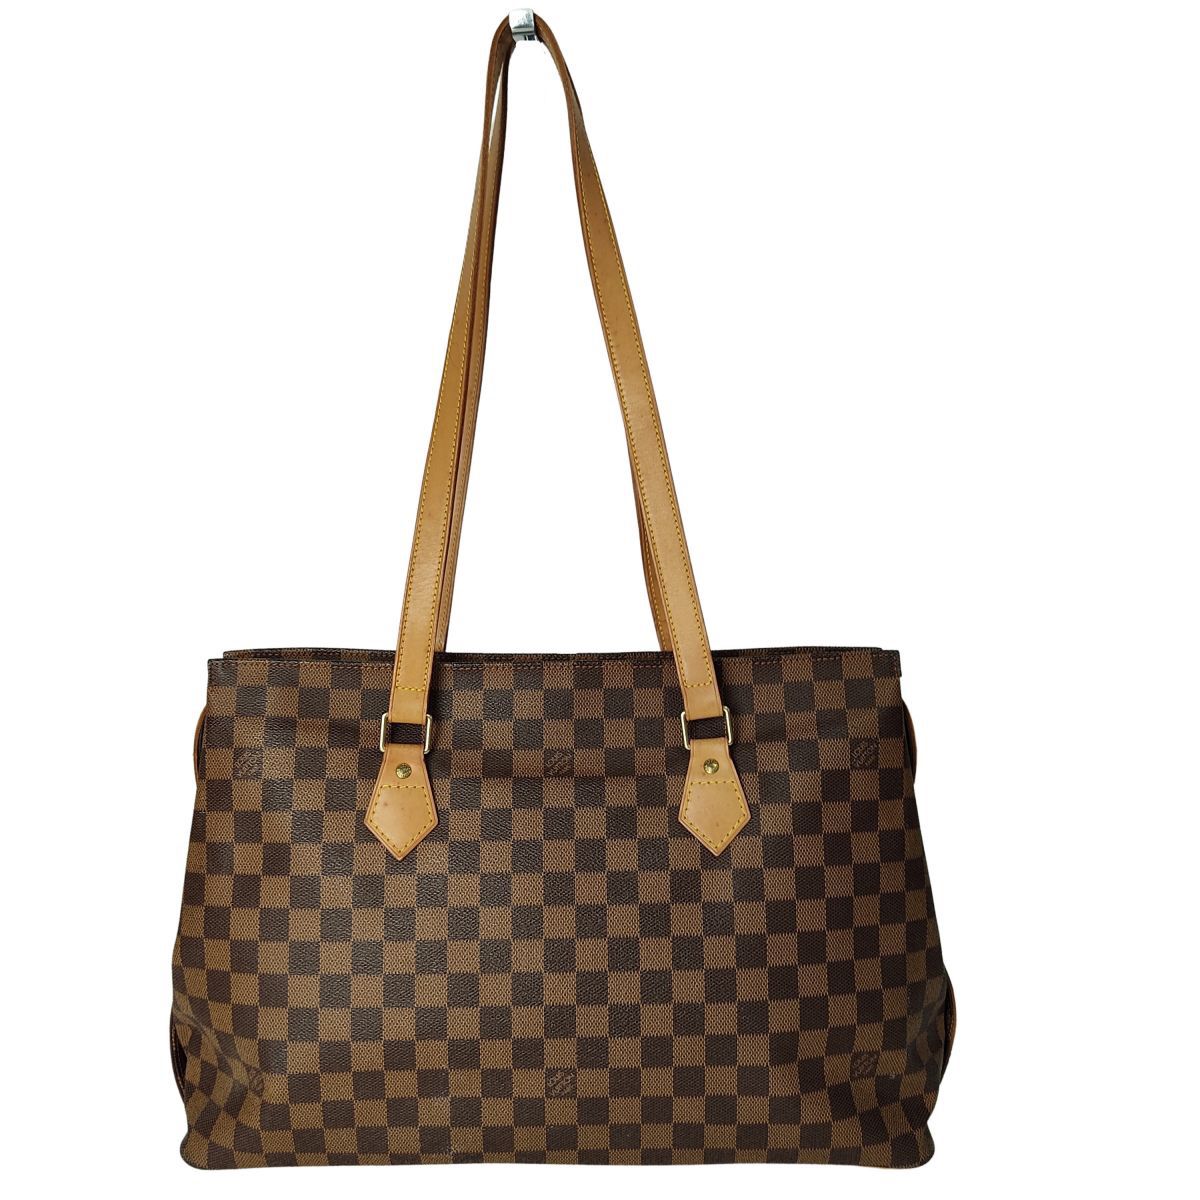 LV Chelsea Bag,limited Edition